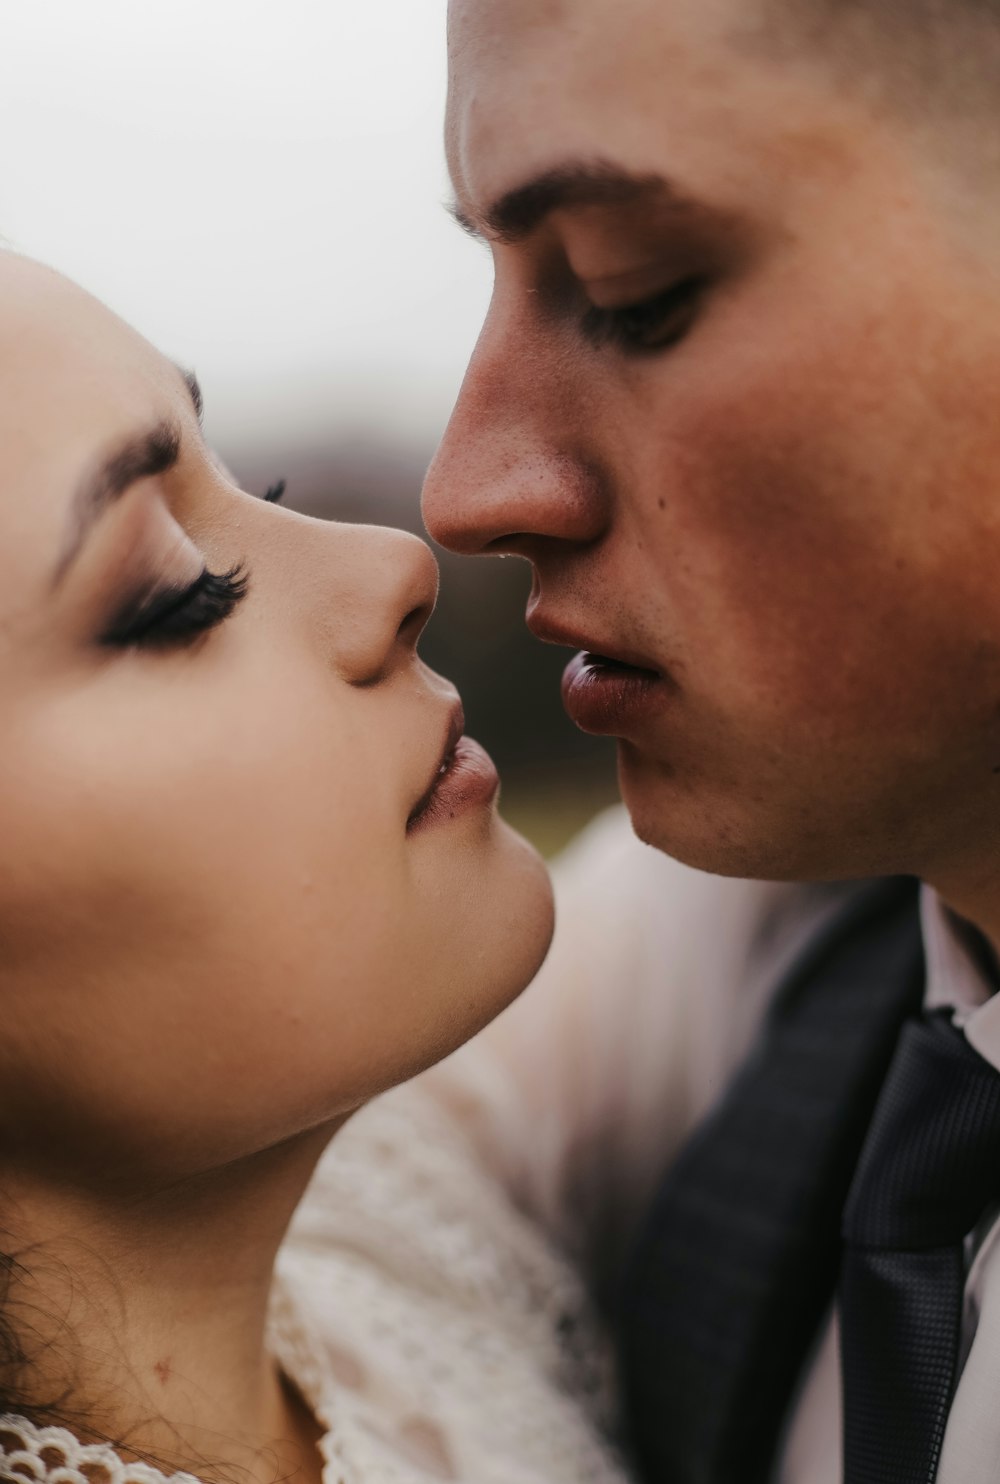 a man and woman kissing